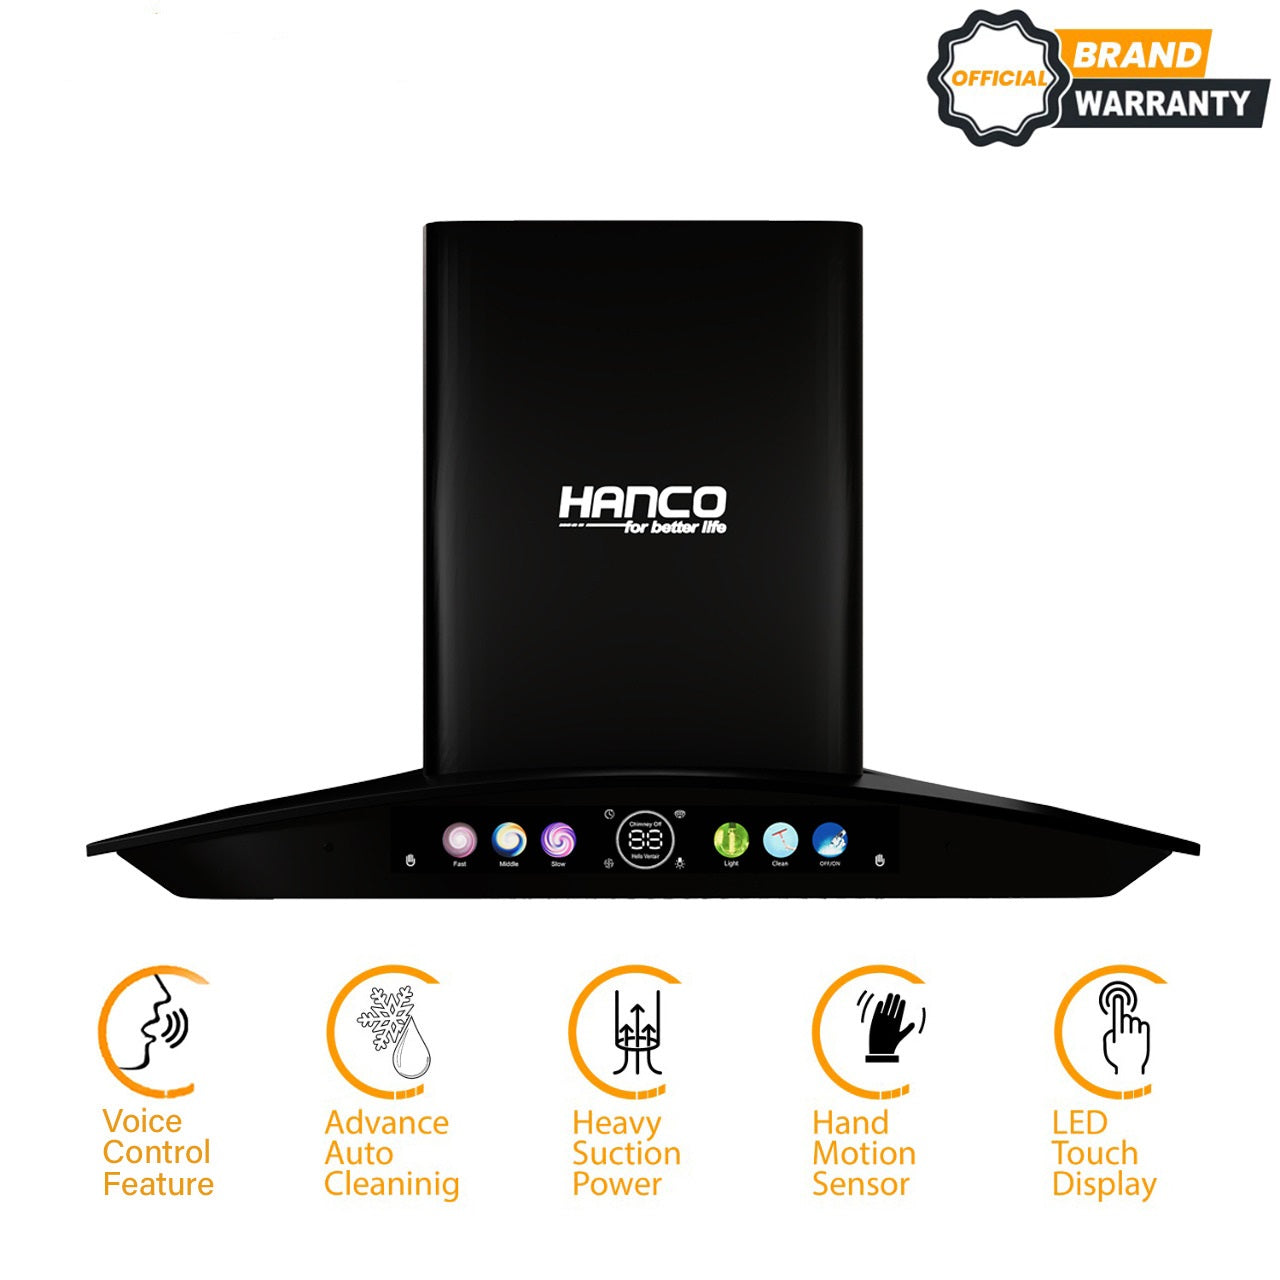 Hanco Hood with Smart Voice Control Model HDE-85 Advance Auto Cleaning, Hand Motion Sensor 1 Year Brand Warranty